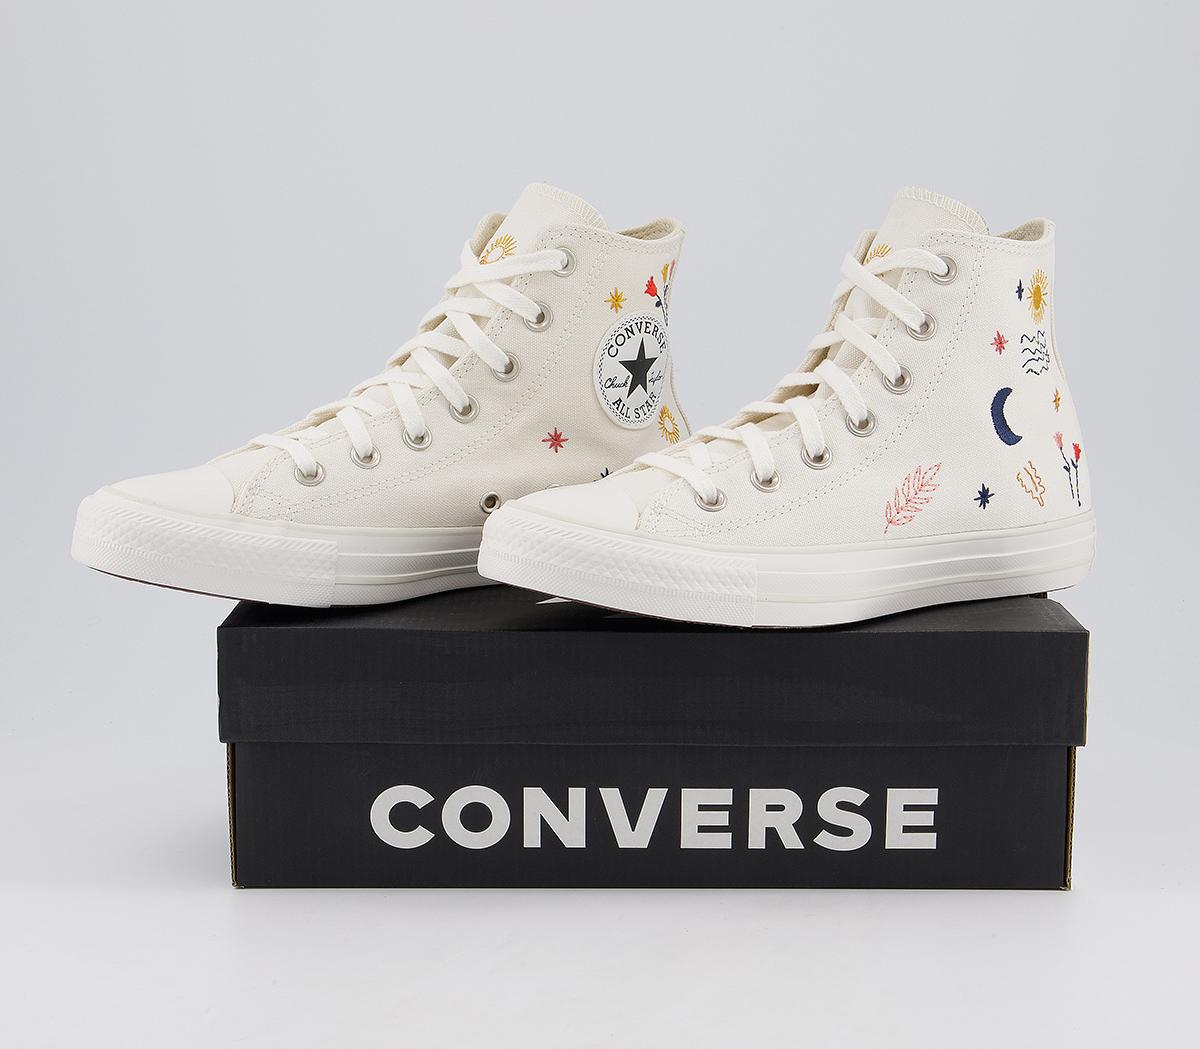 Converse Converse All Star Hi Trainers Egret Vintage White Black - Hers trainers